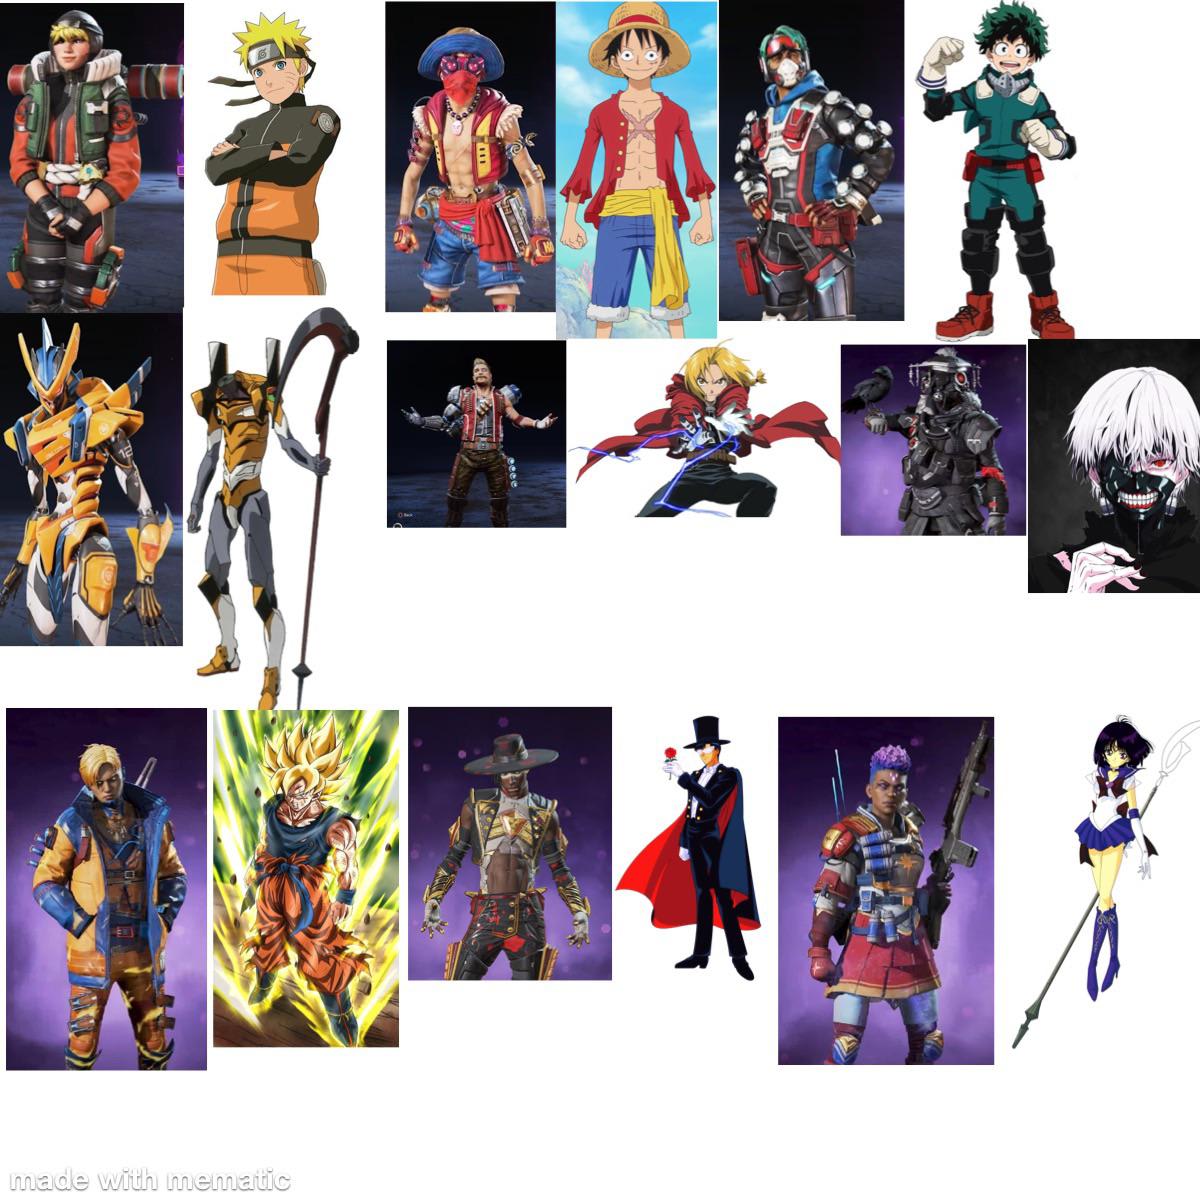 All Gaiden event skin reference Watson is naruto octane is luffy Mirage is deku revenant is an evangelion unit fuse is Edward from fullmetal alchemist brotherhood bloodhound is ken kaneki from Tokyo ghoul crypto is goku seer is tuxedo mask from sailor moon Bangalore is sailor Saturn from sailor moon